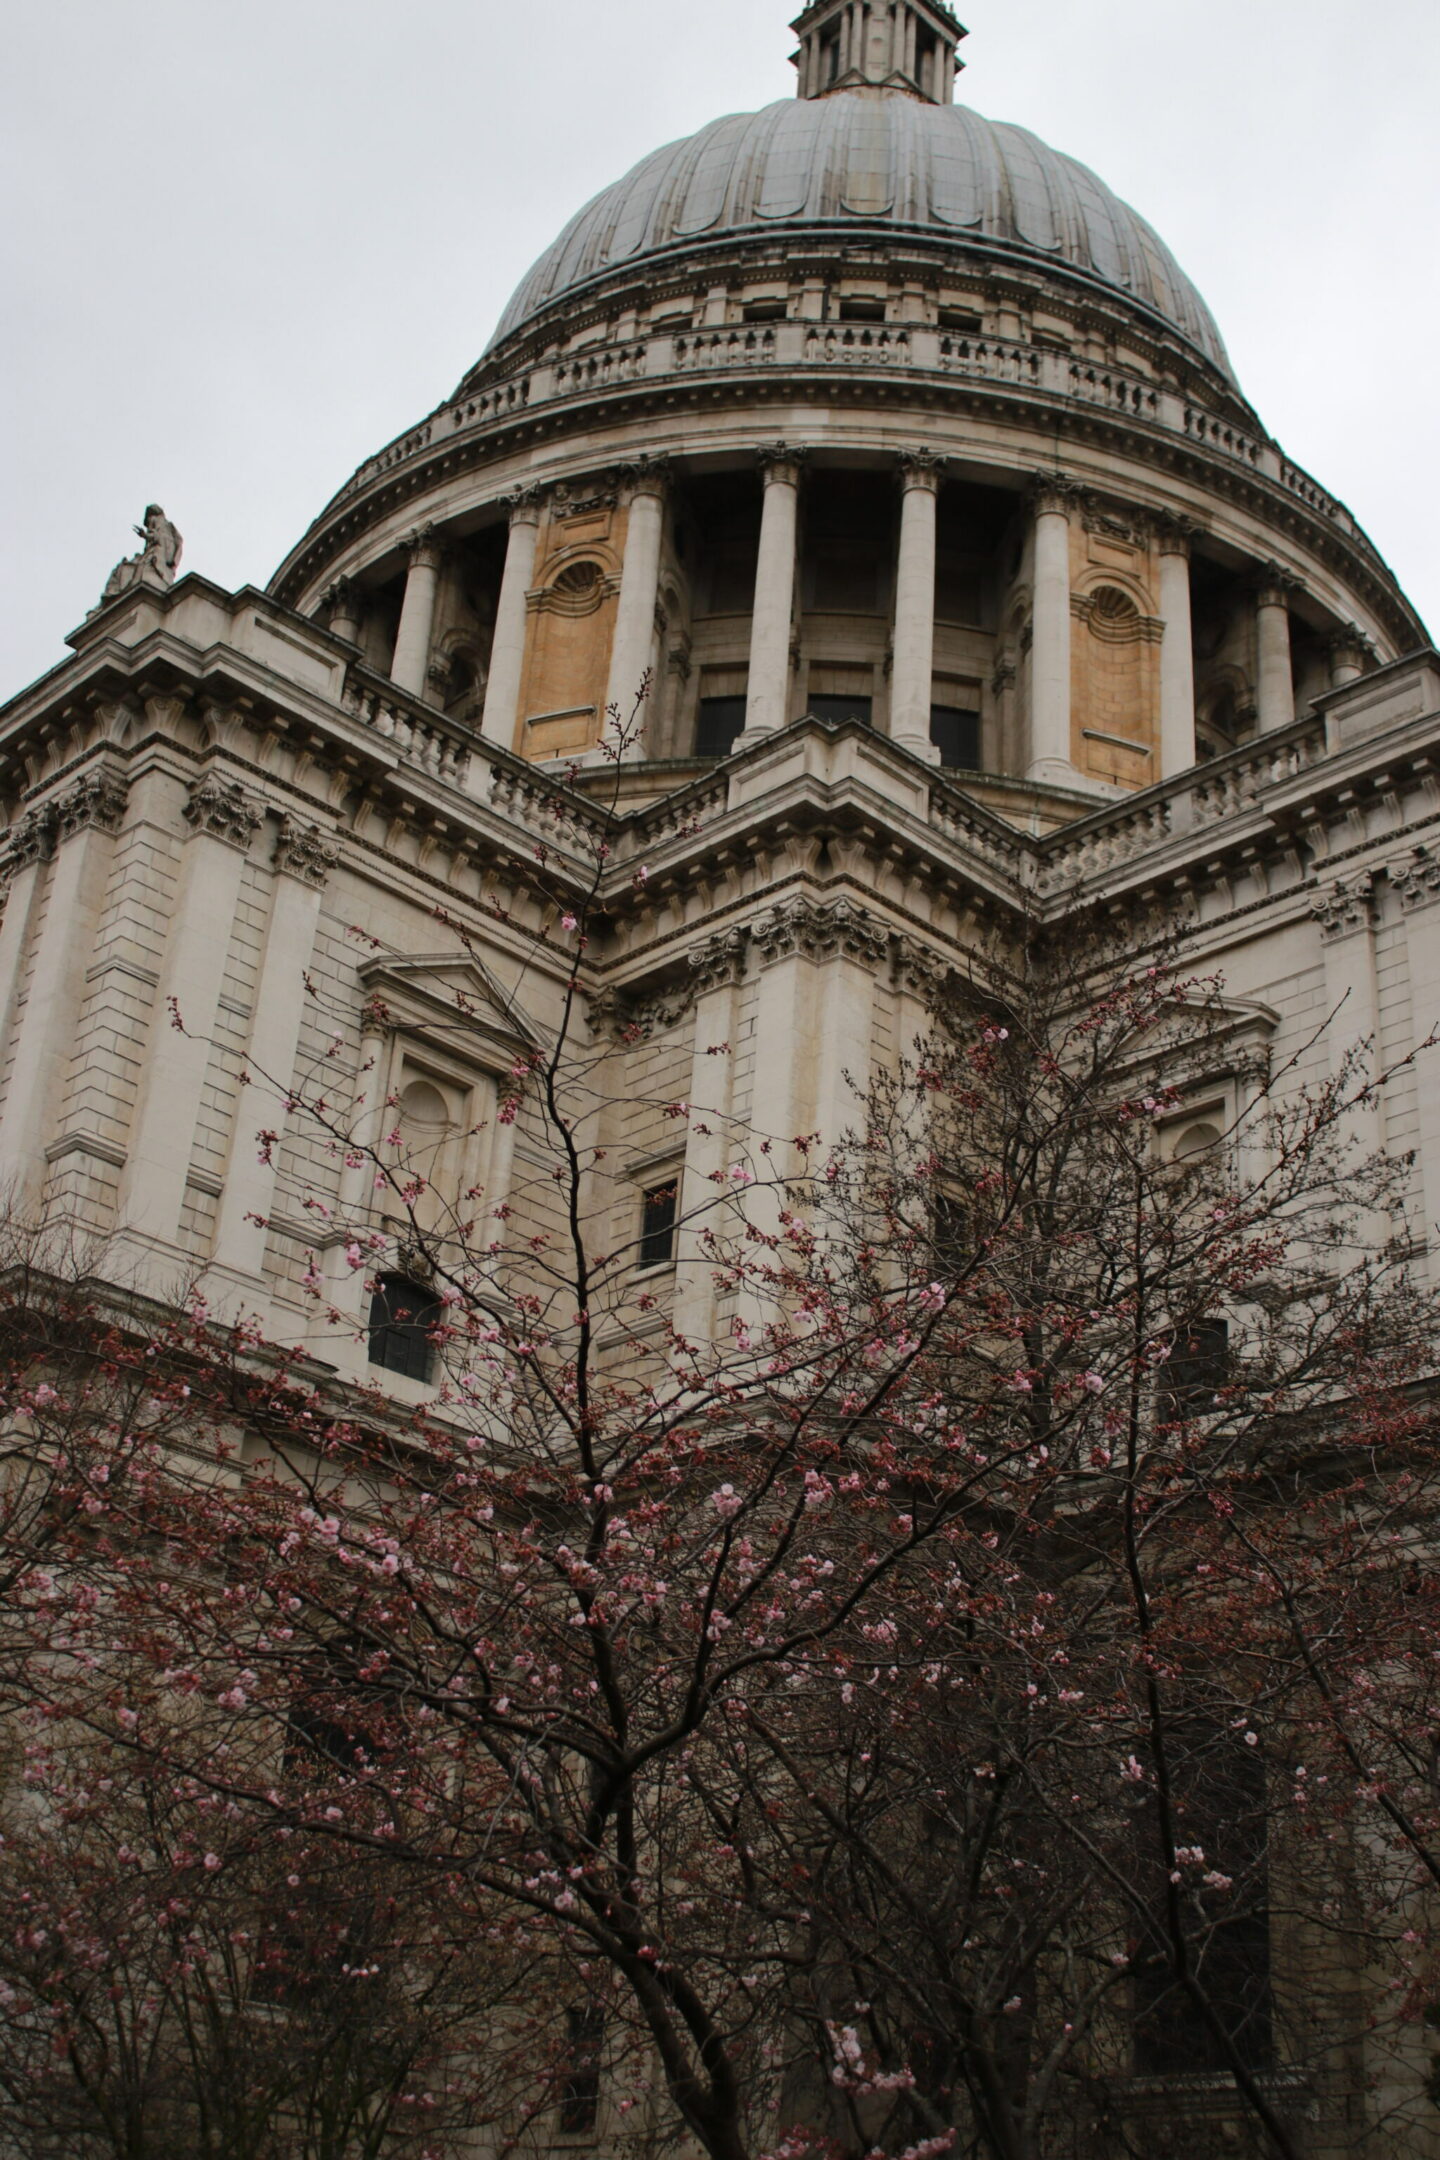 St Paul's Cathedral
How to see london in 1 day